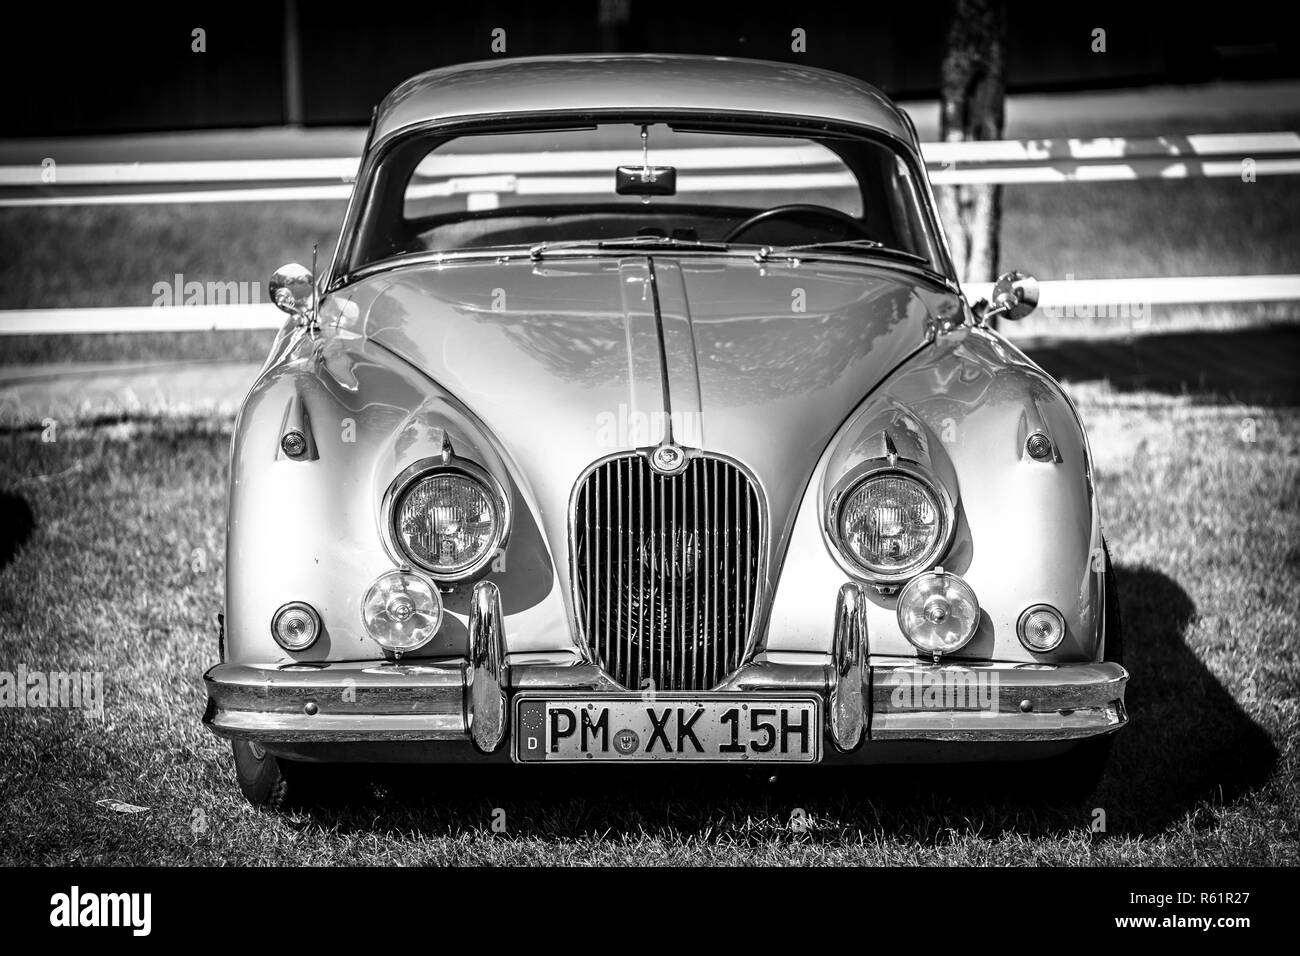 PAAREN IM GLIEN, GERMANY - MAY 19, 2018: Sports car Jaguar XK150 (FHC), 1961. Black and white. Die Oldtimer Show 2018. Stock Photo